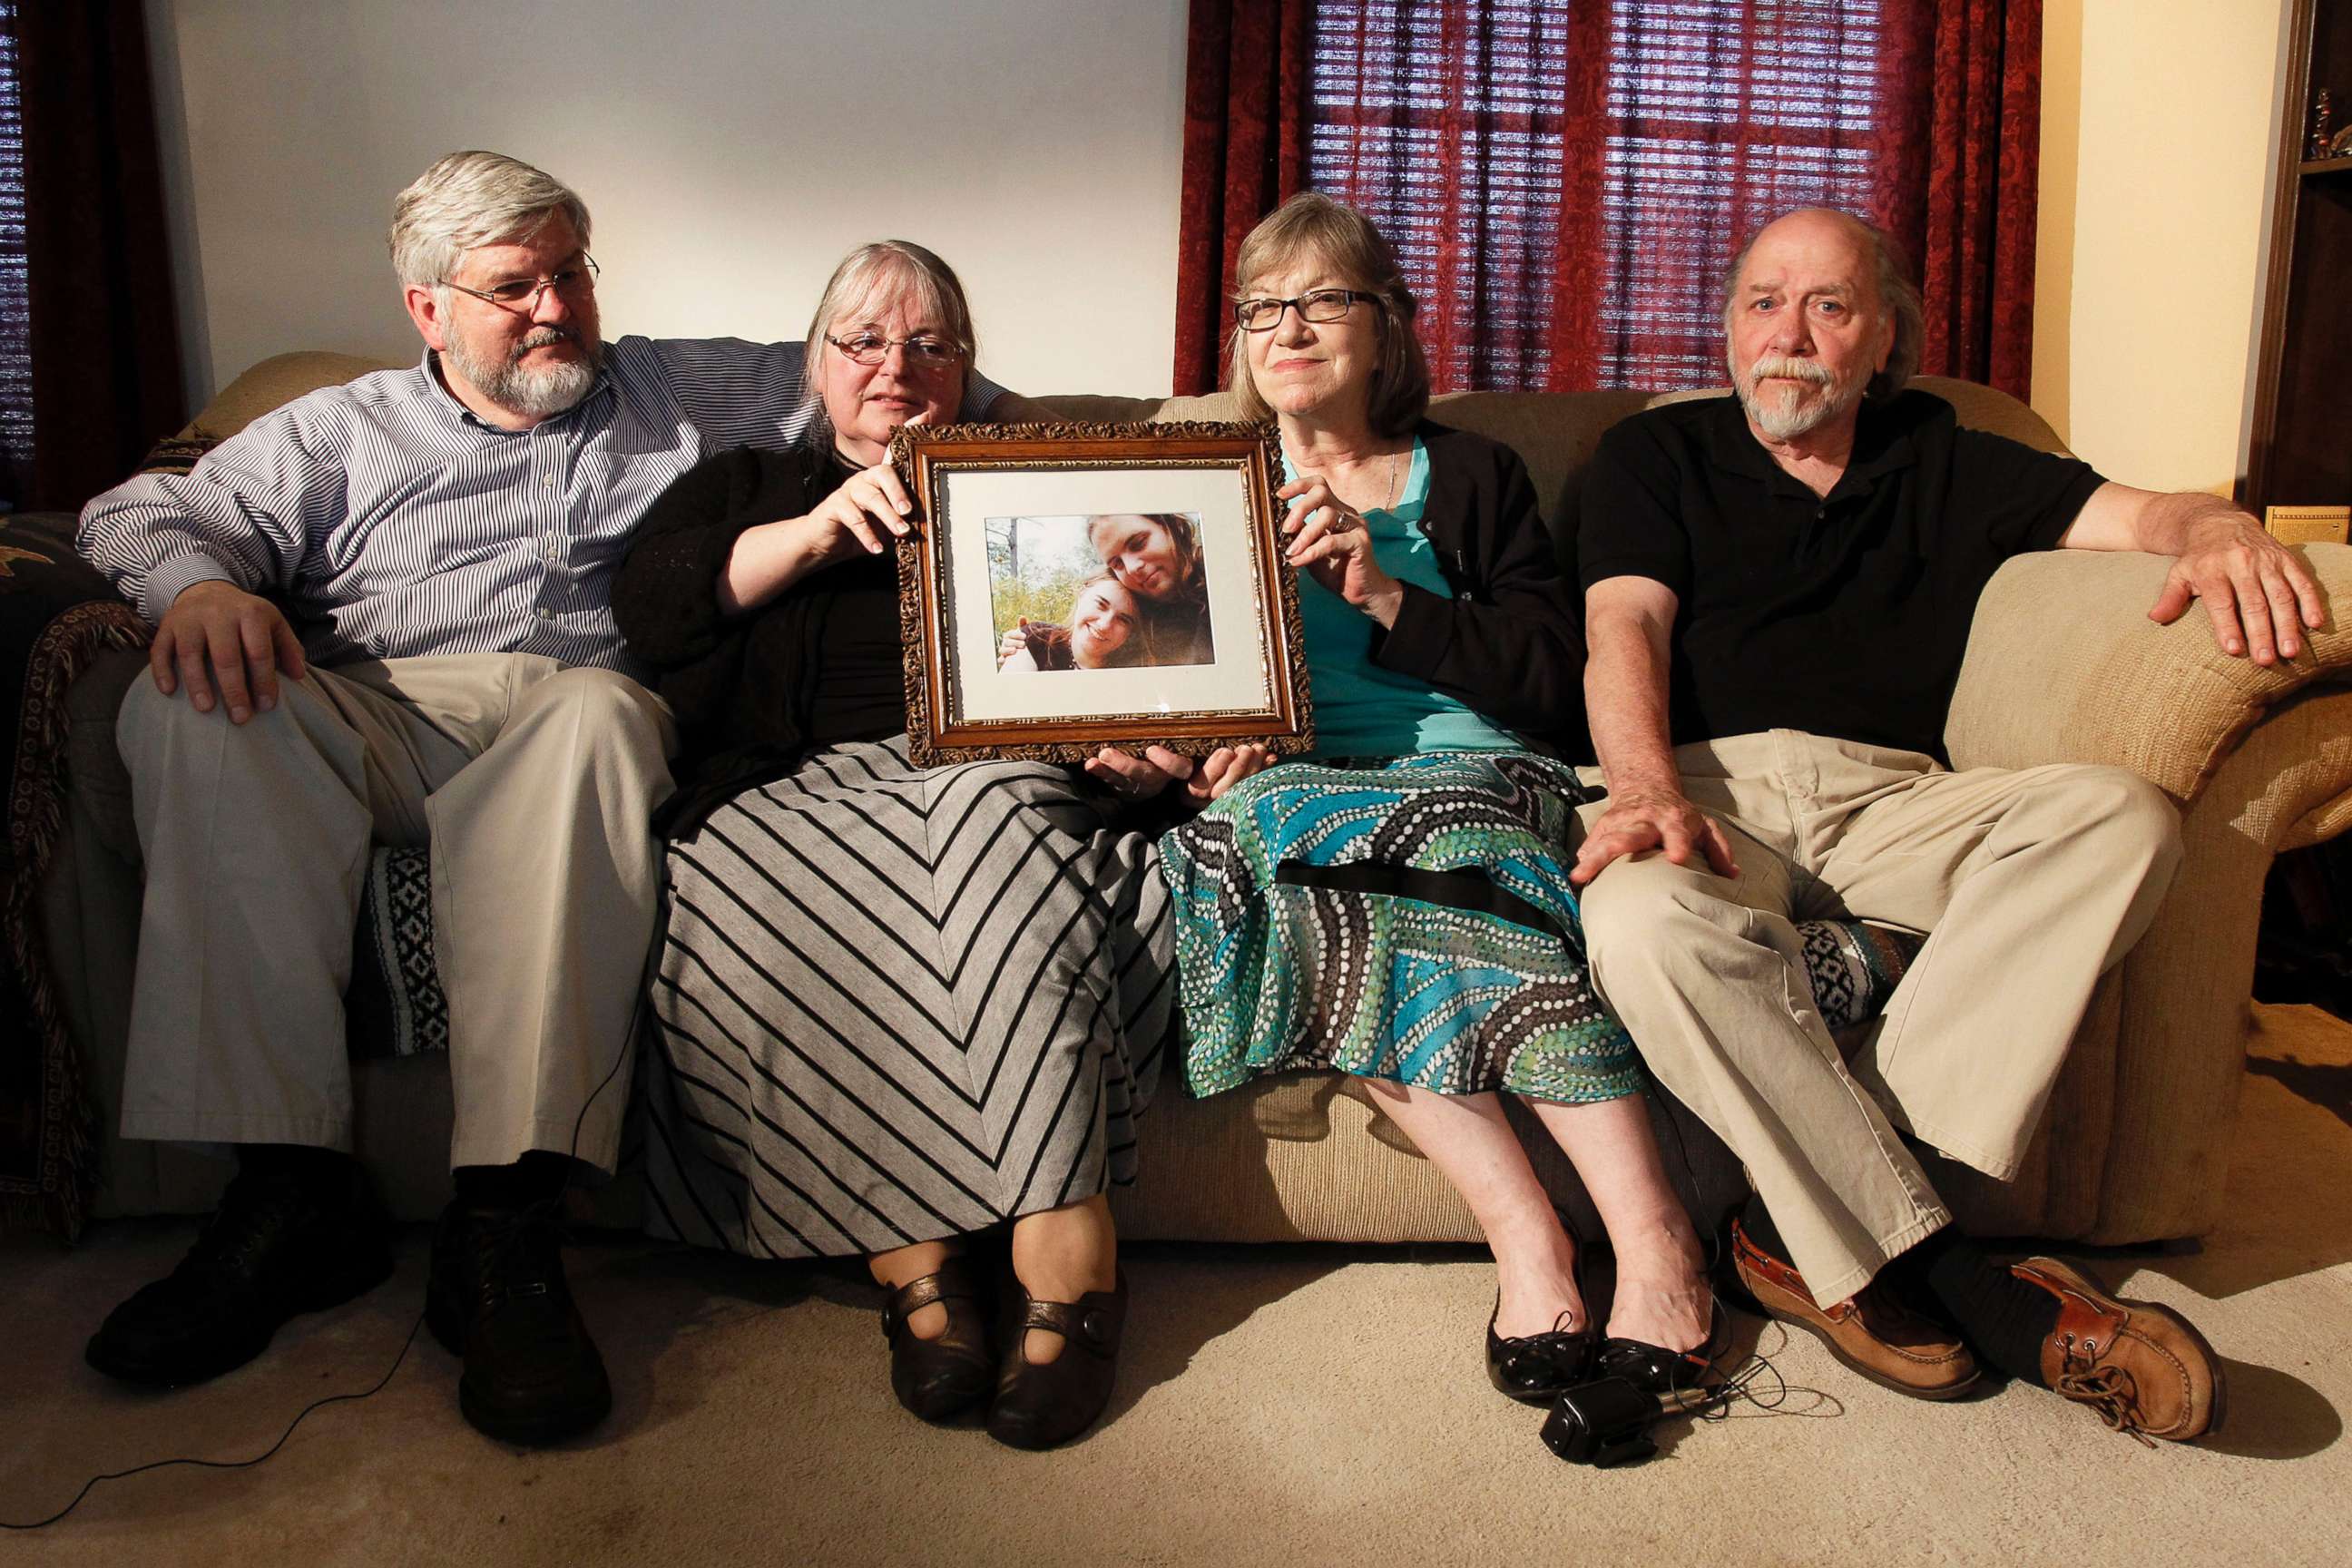 PHOTO: From left, Patrick Boyle, Linda Boyle, Lyn Coleman and Jim Coleman with a photo of their kidnapped children, Joshua Boyle and Caitlan Coleman, who were kidnapped by the Taliban in late 2012, June 4, 2014, in Stewartstown, Pa.  